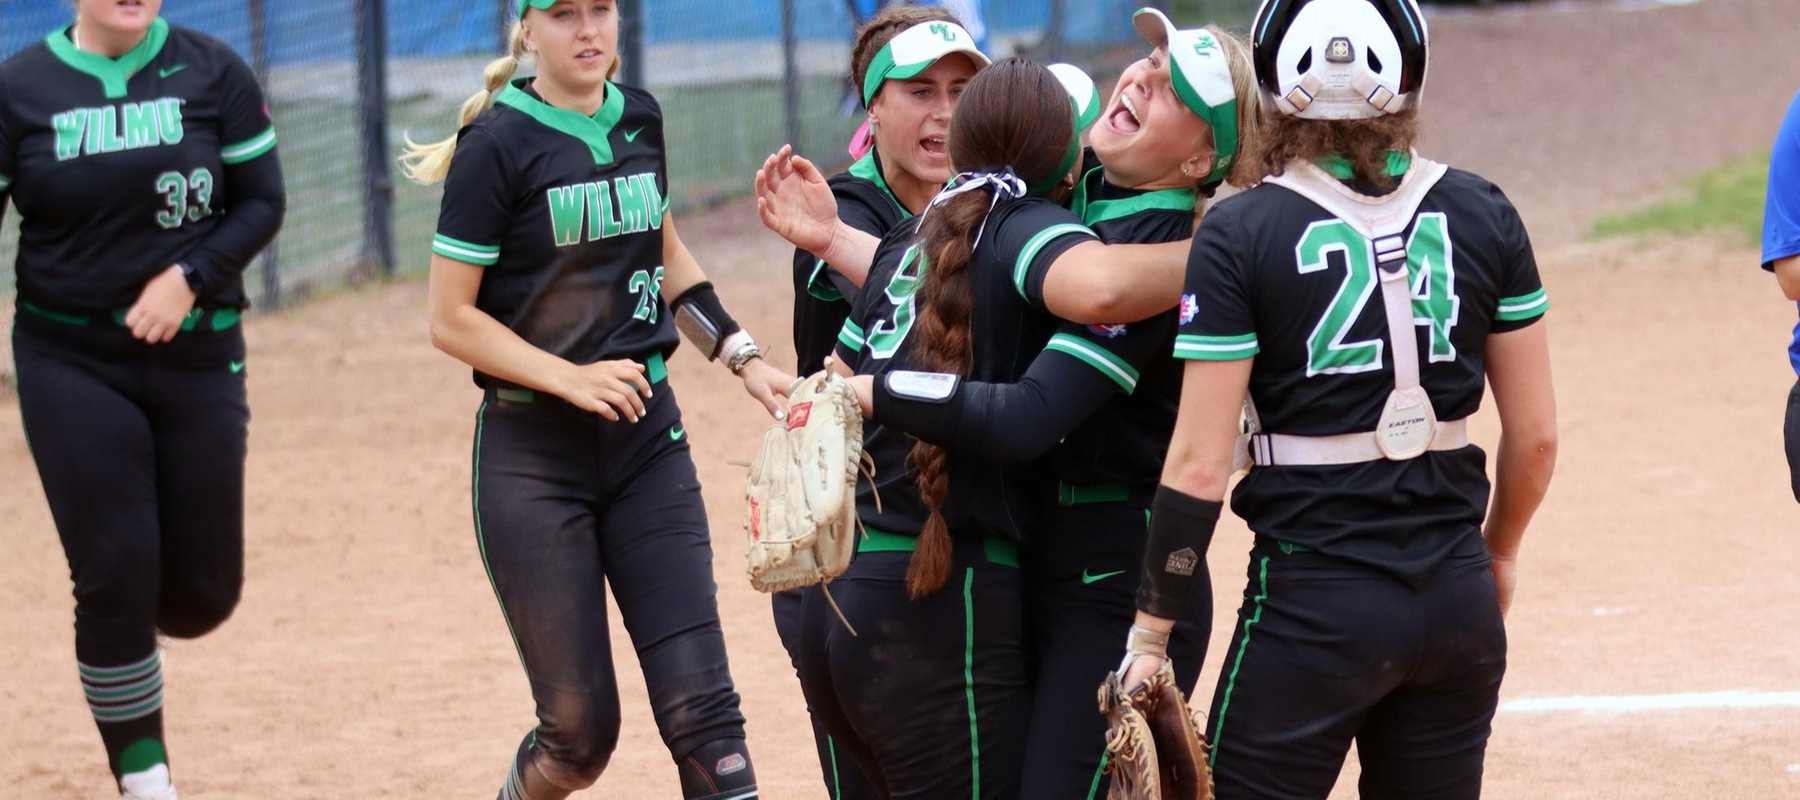 Photo of Renamarie Rocha meeting Kylee Gunkel after the freshman got out of the 6th inning bases-loaded jam to keep the score, 2-1. Copyright 2022; Wilmington University. All rights reserved. Photo by Dan Lauletta. May 13, 2022 vs. Georgian Court in NCAA Regional at GCU.